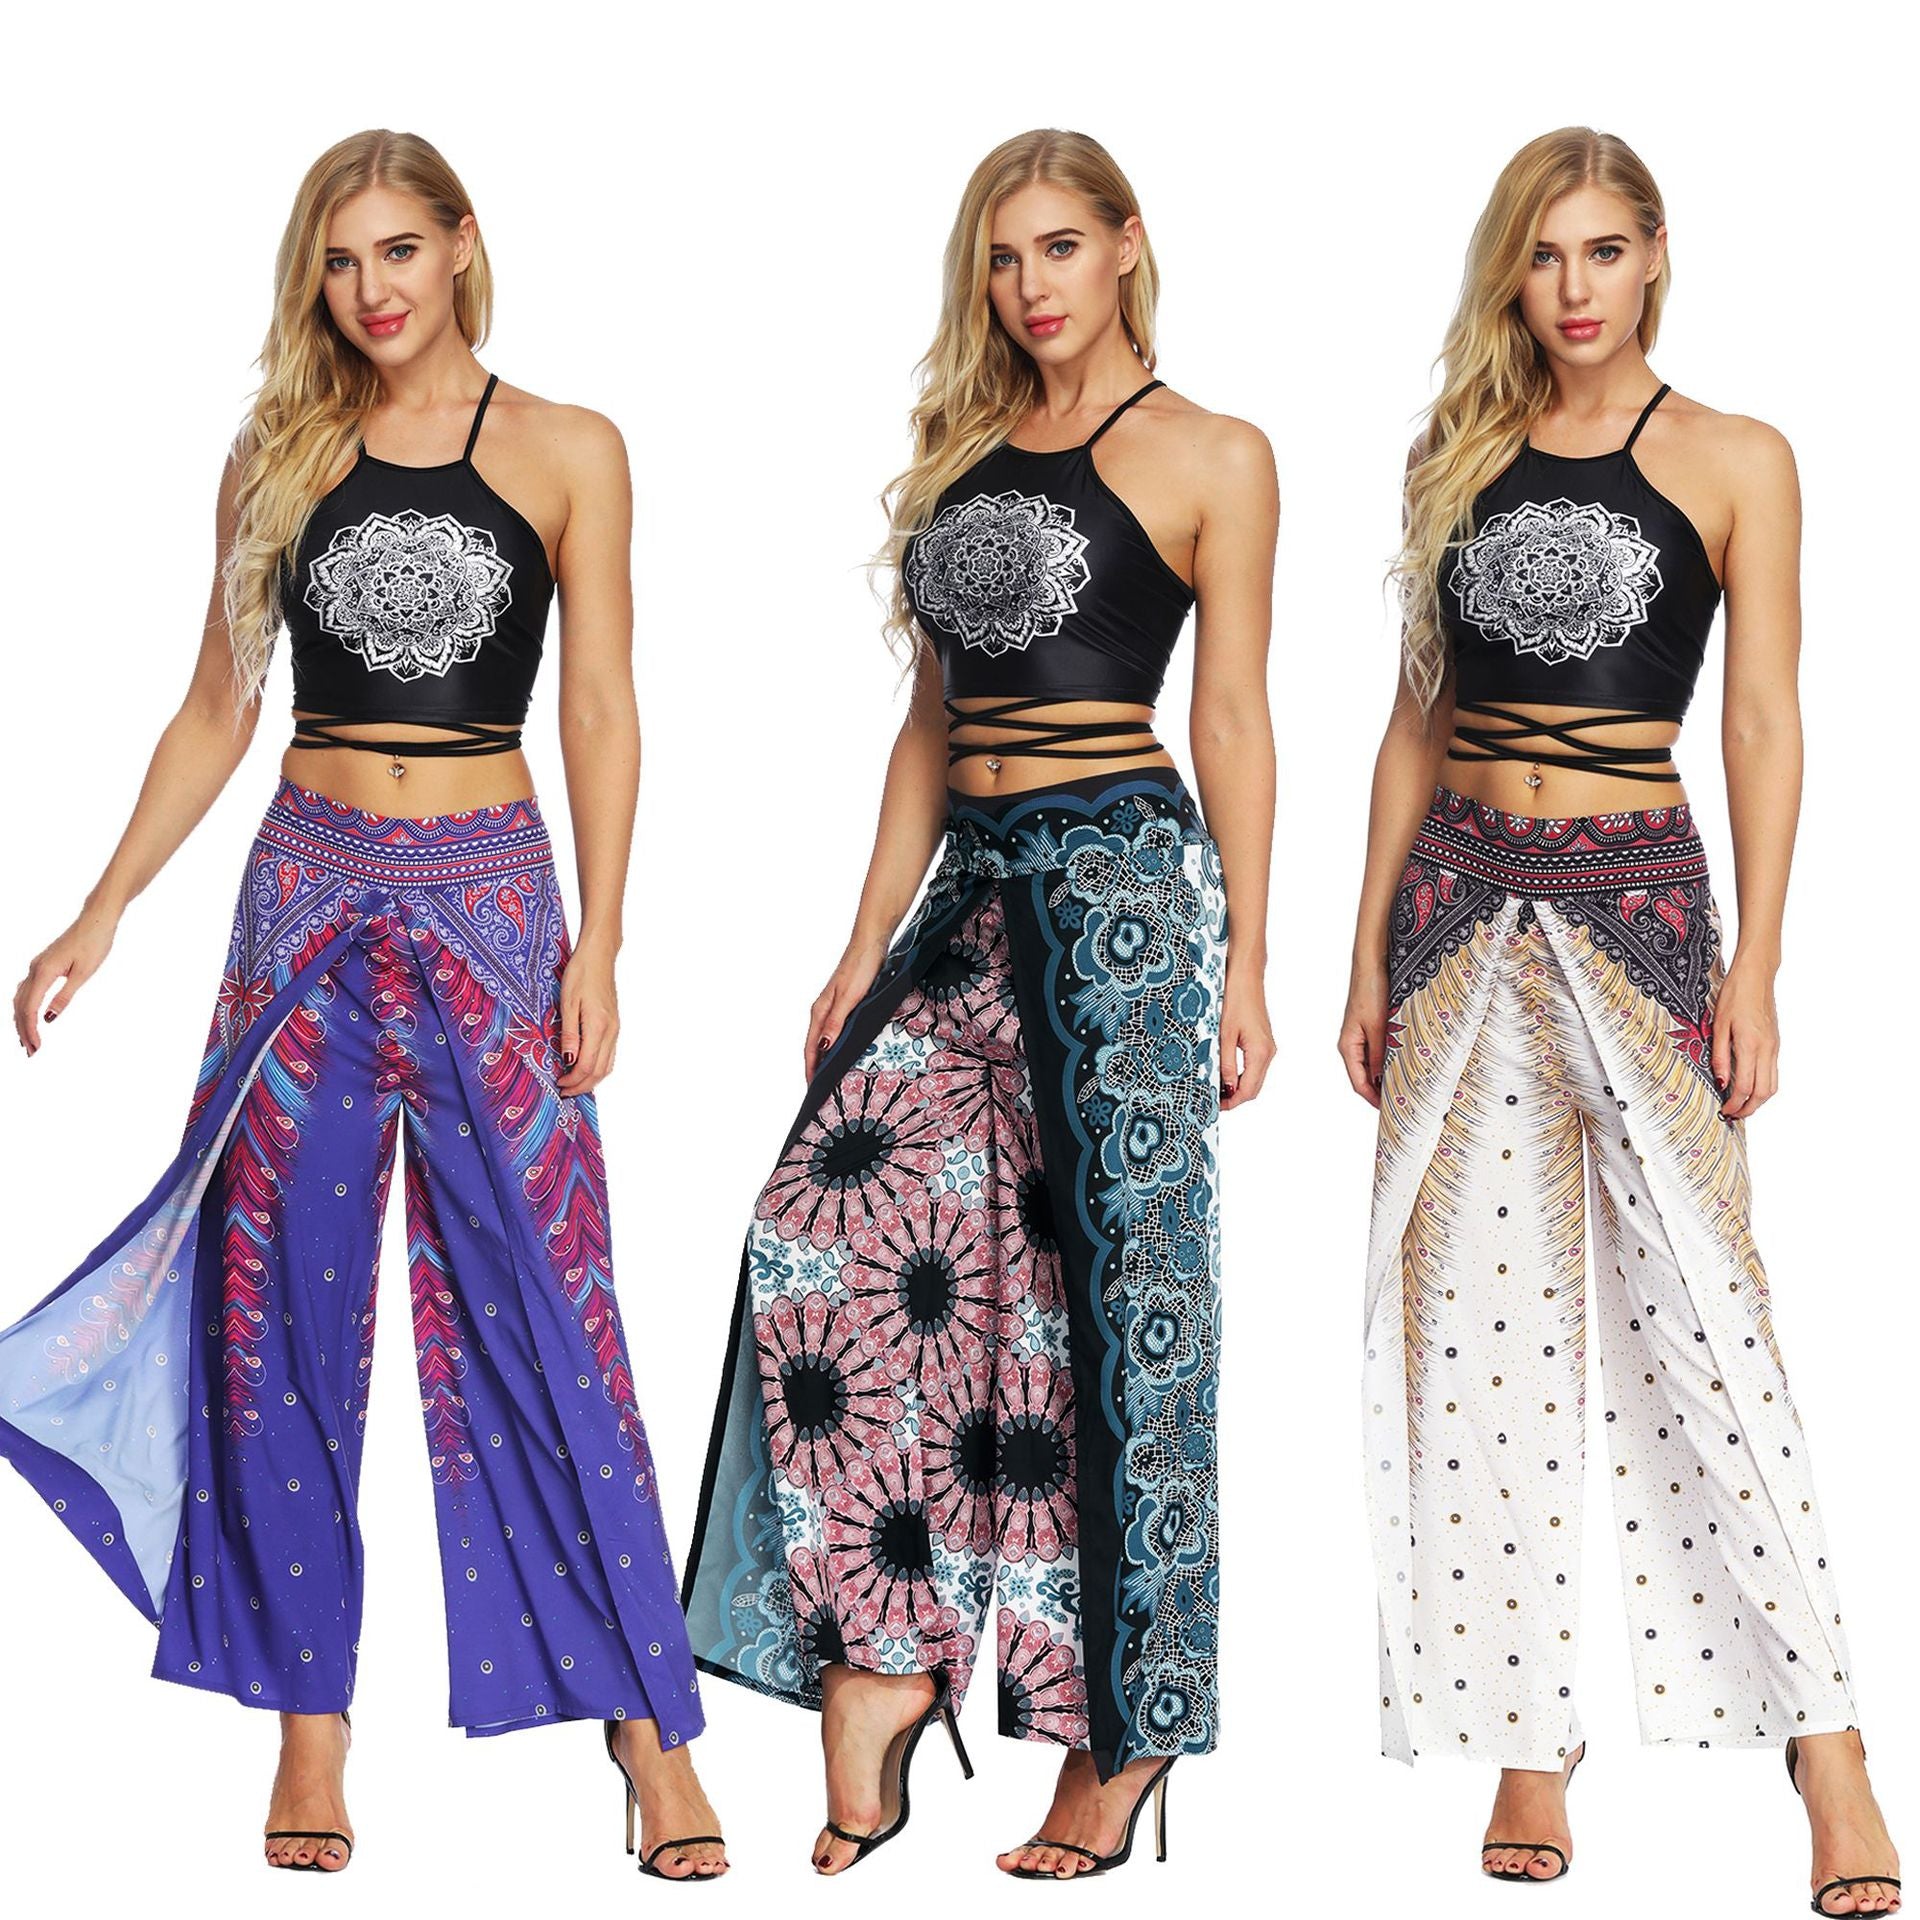 Maramalive™ Women's Wide Leg Boho Yoga Harem Pants in different colors for a comfy and boho look.